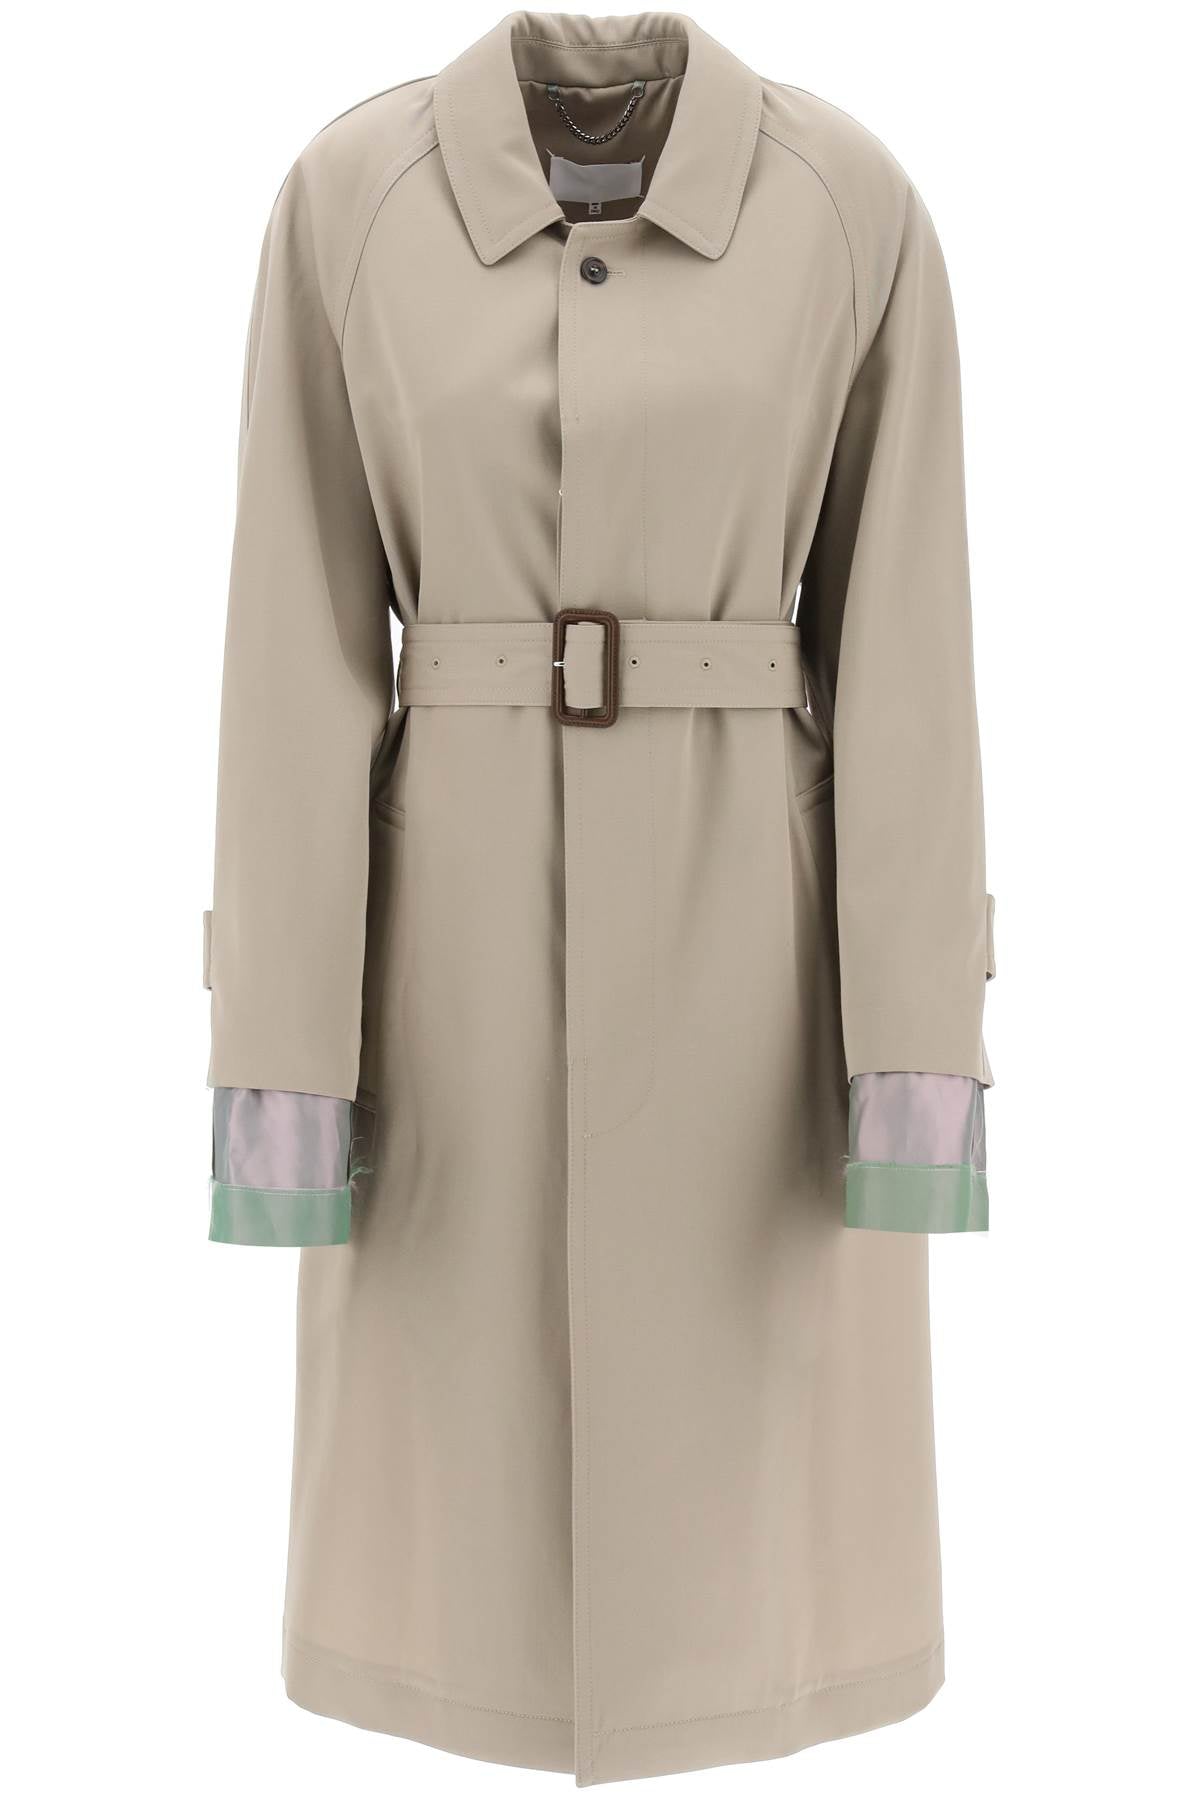 MAISON MARGIELA Beige Trench Jacket with Unique Anonymity Detail